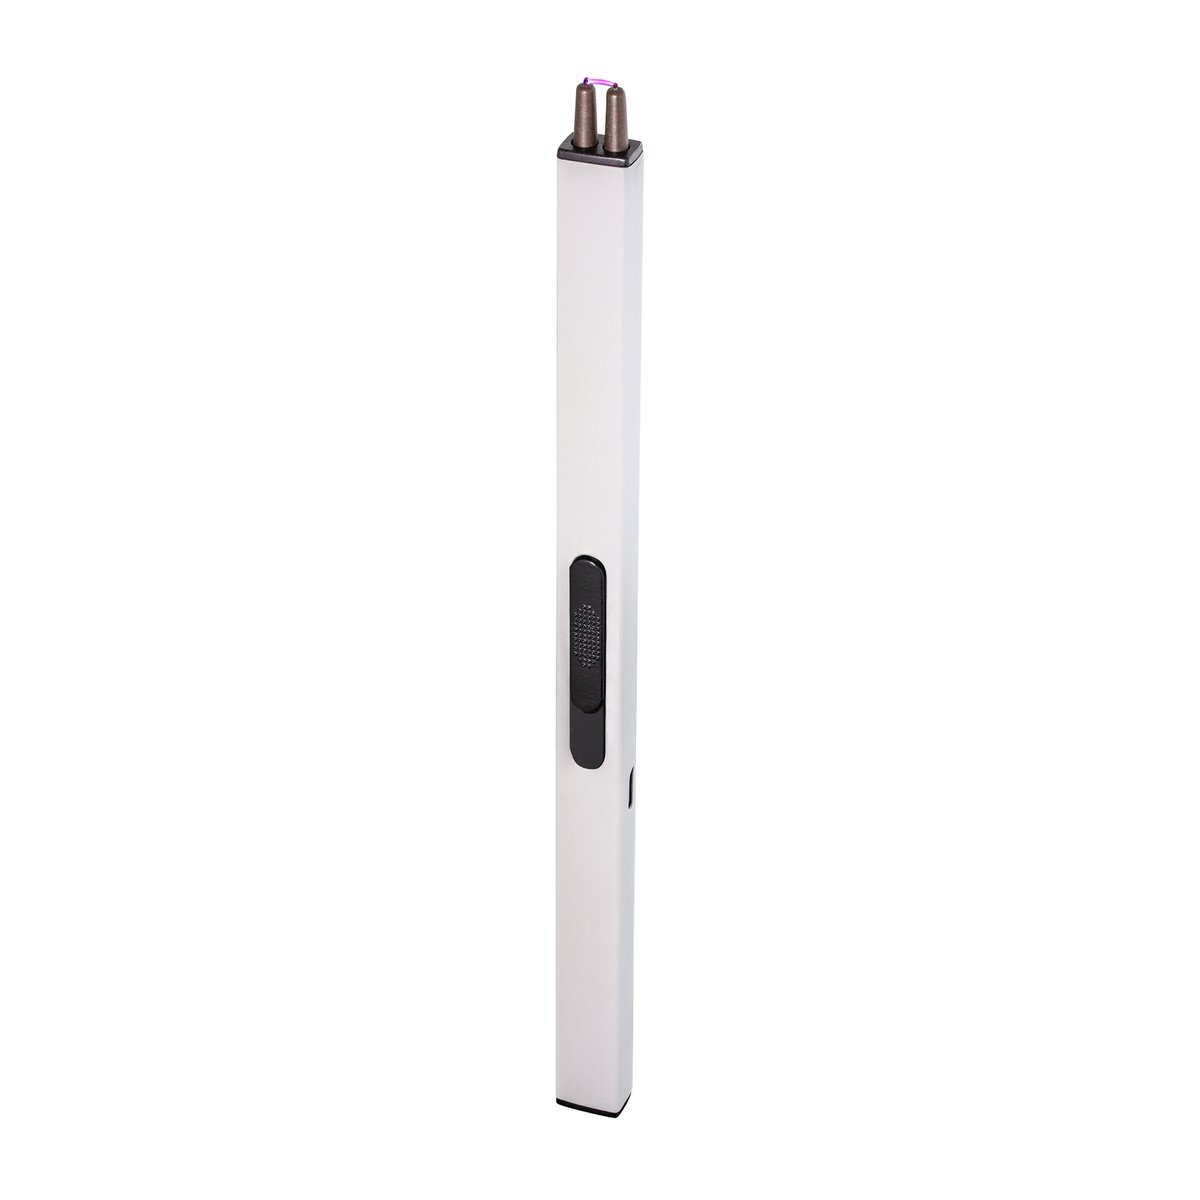 Electric arc candle lighter REEVES-BUKAREST white